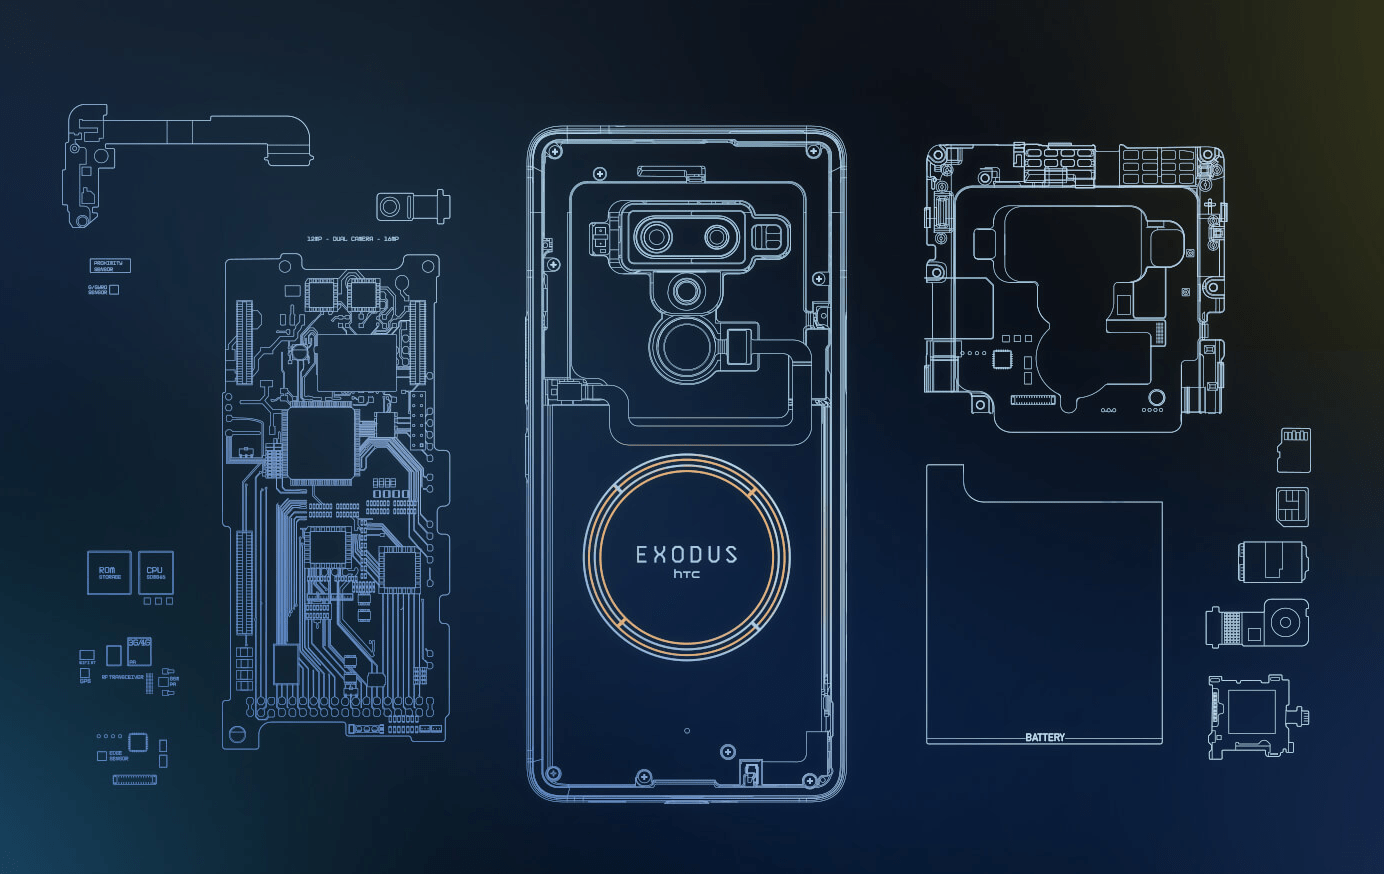 HTC EXODUS 1 - Exploded View